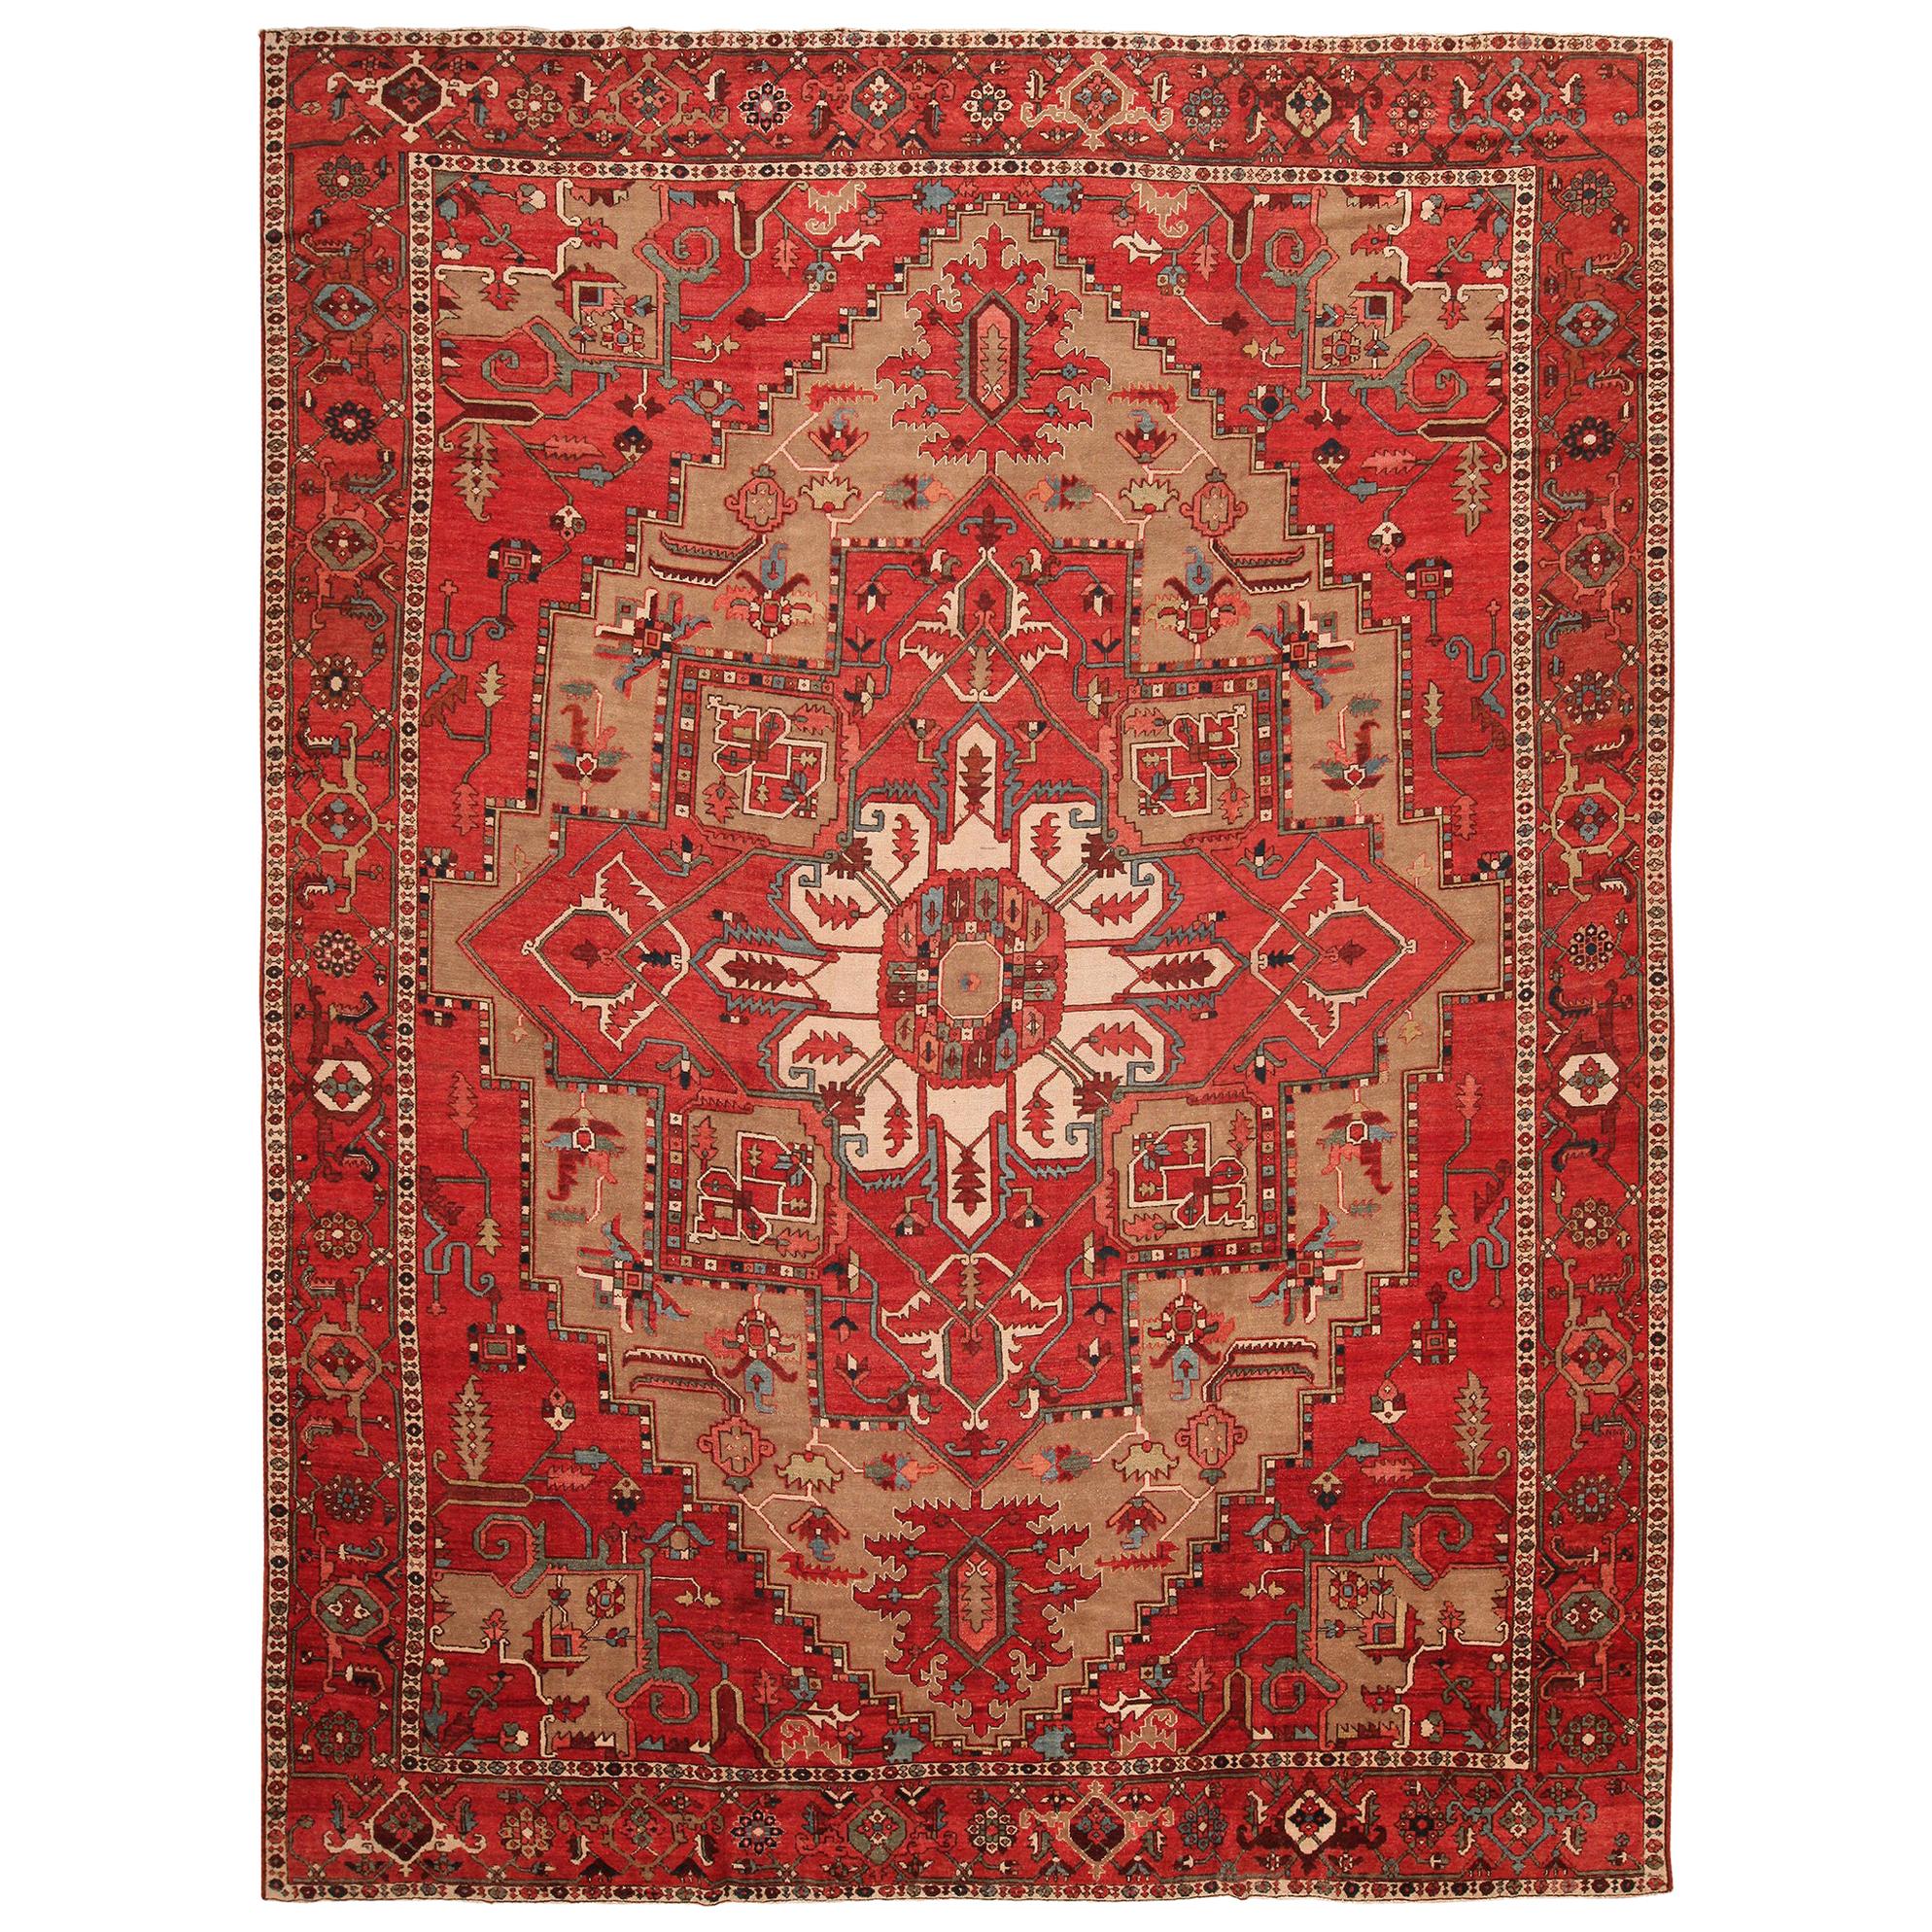 Tapis persan antique Serapi. Taille : 11 ft 6 in x 15 ft